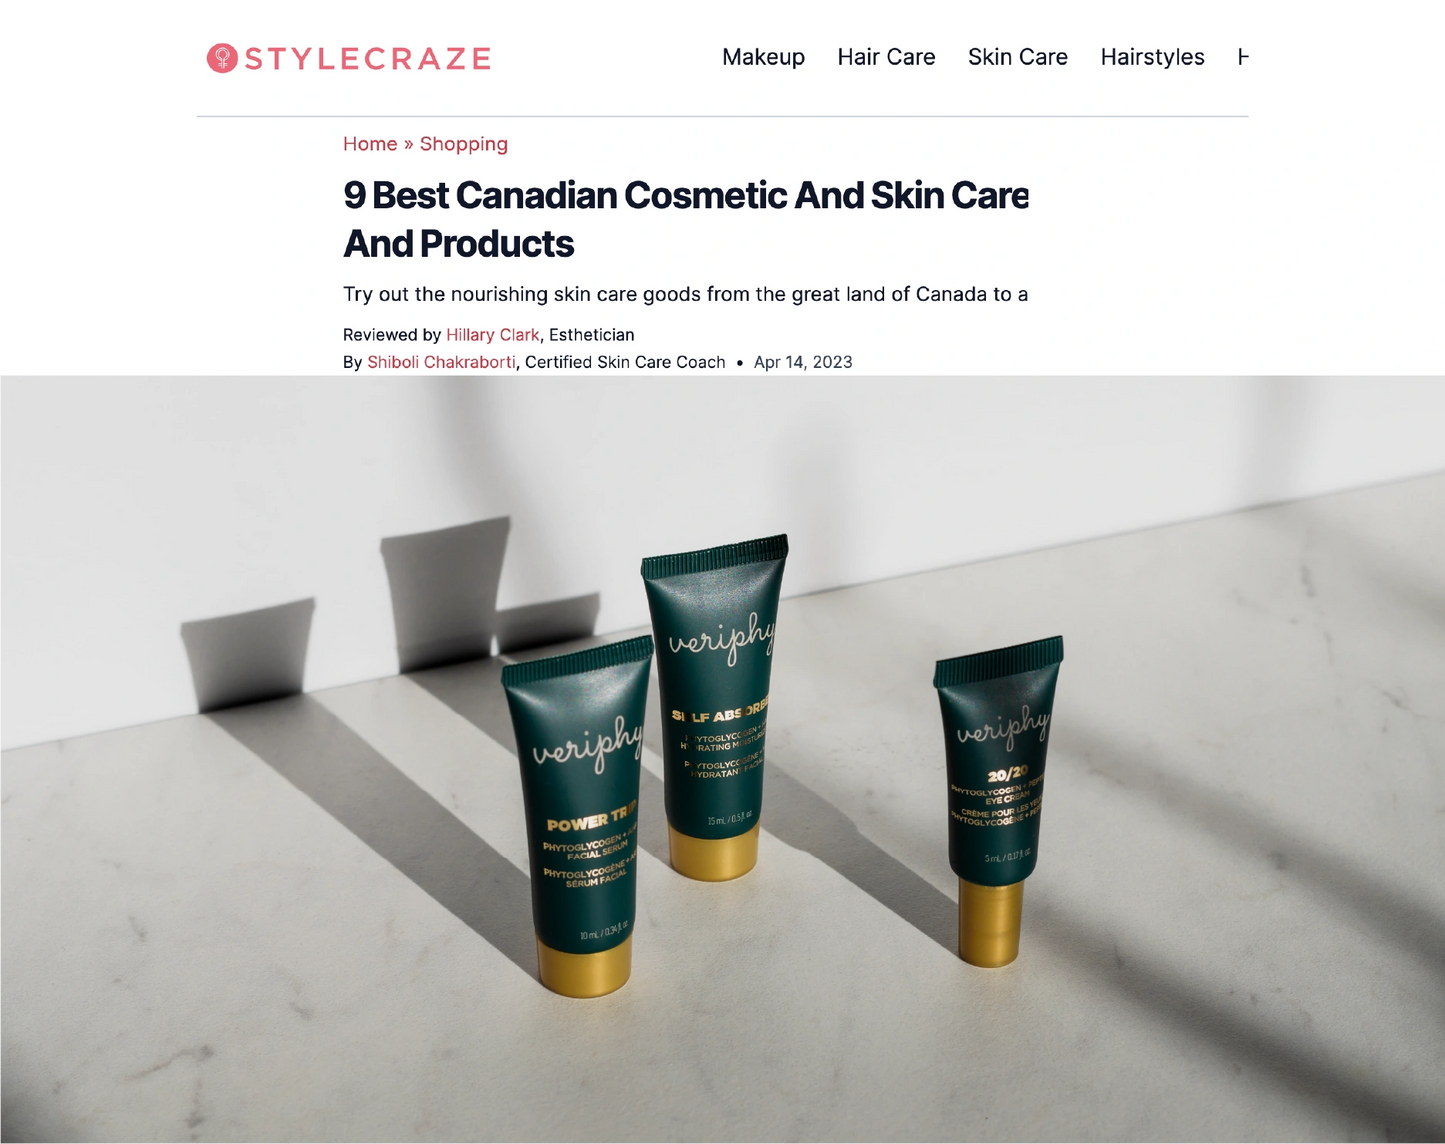 Veriphy Skincare featured in Two Classy Chics Blog